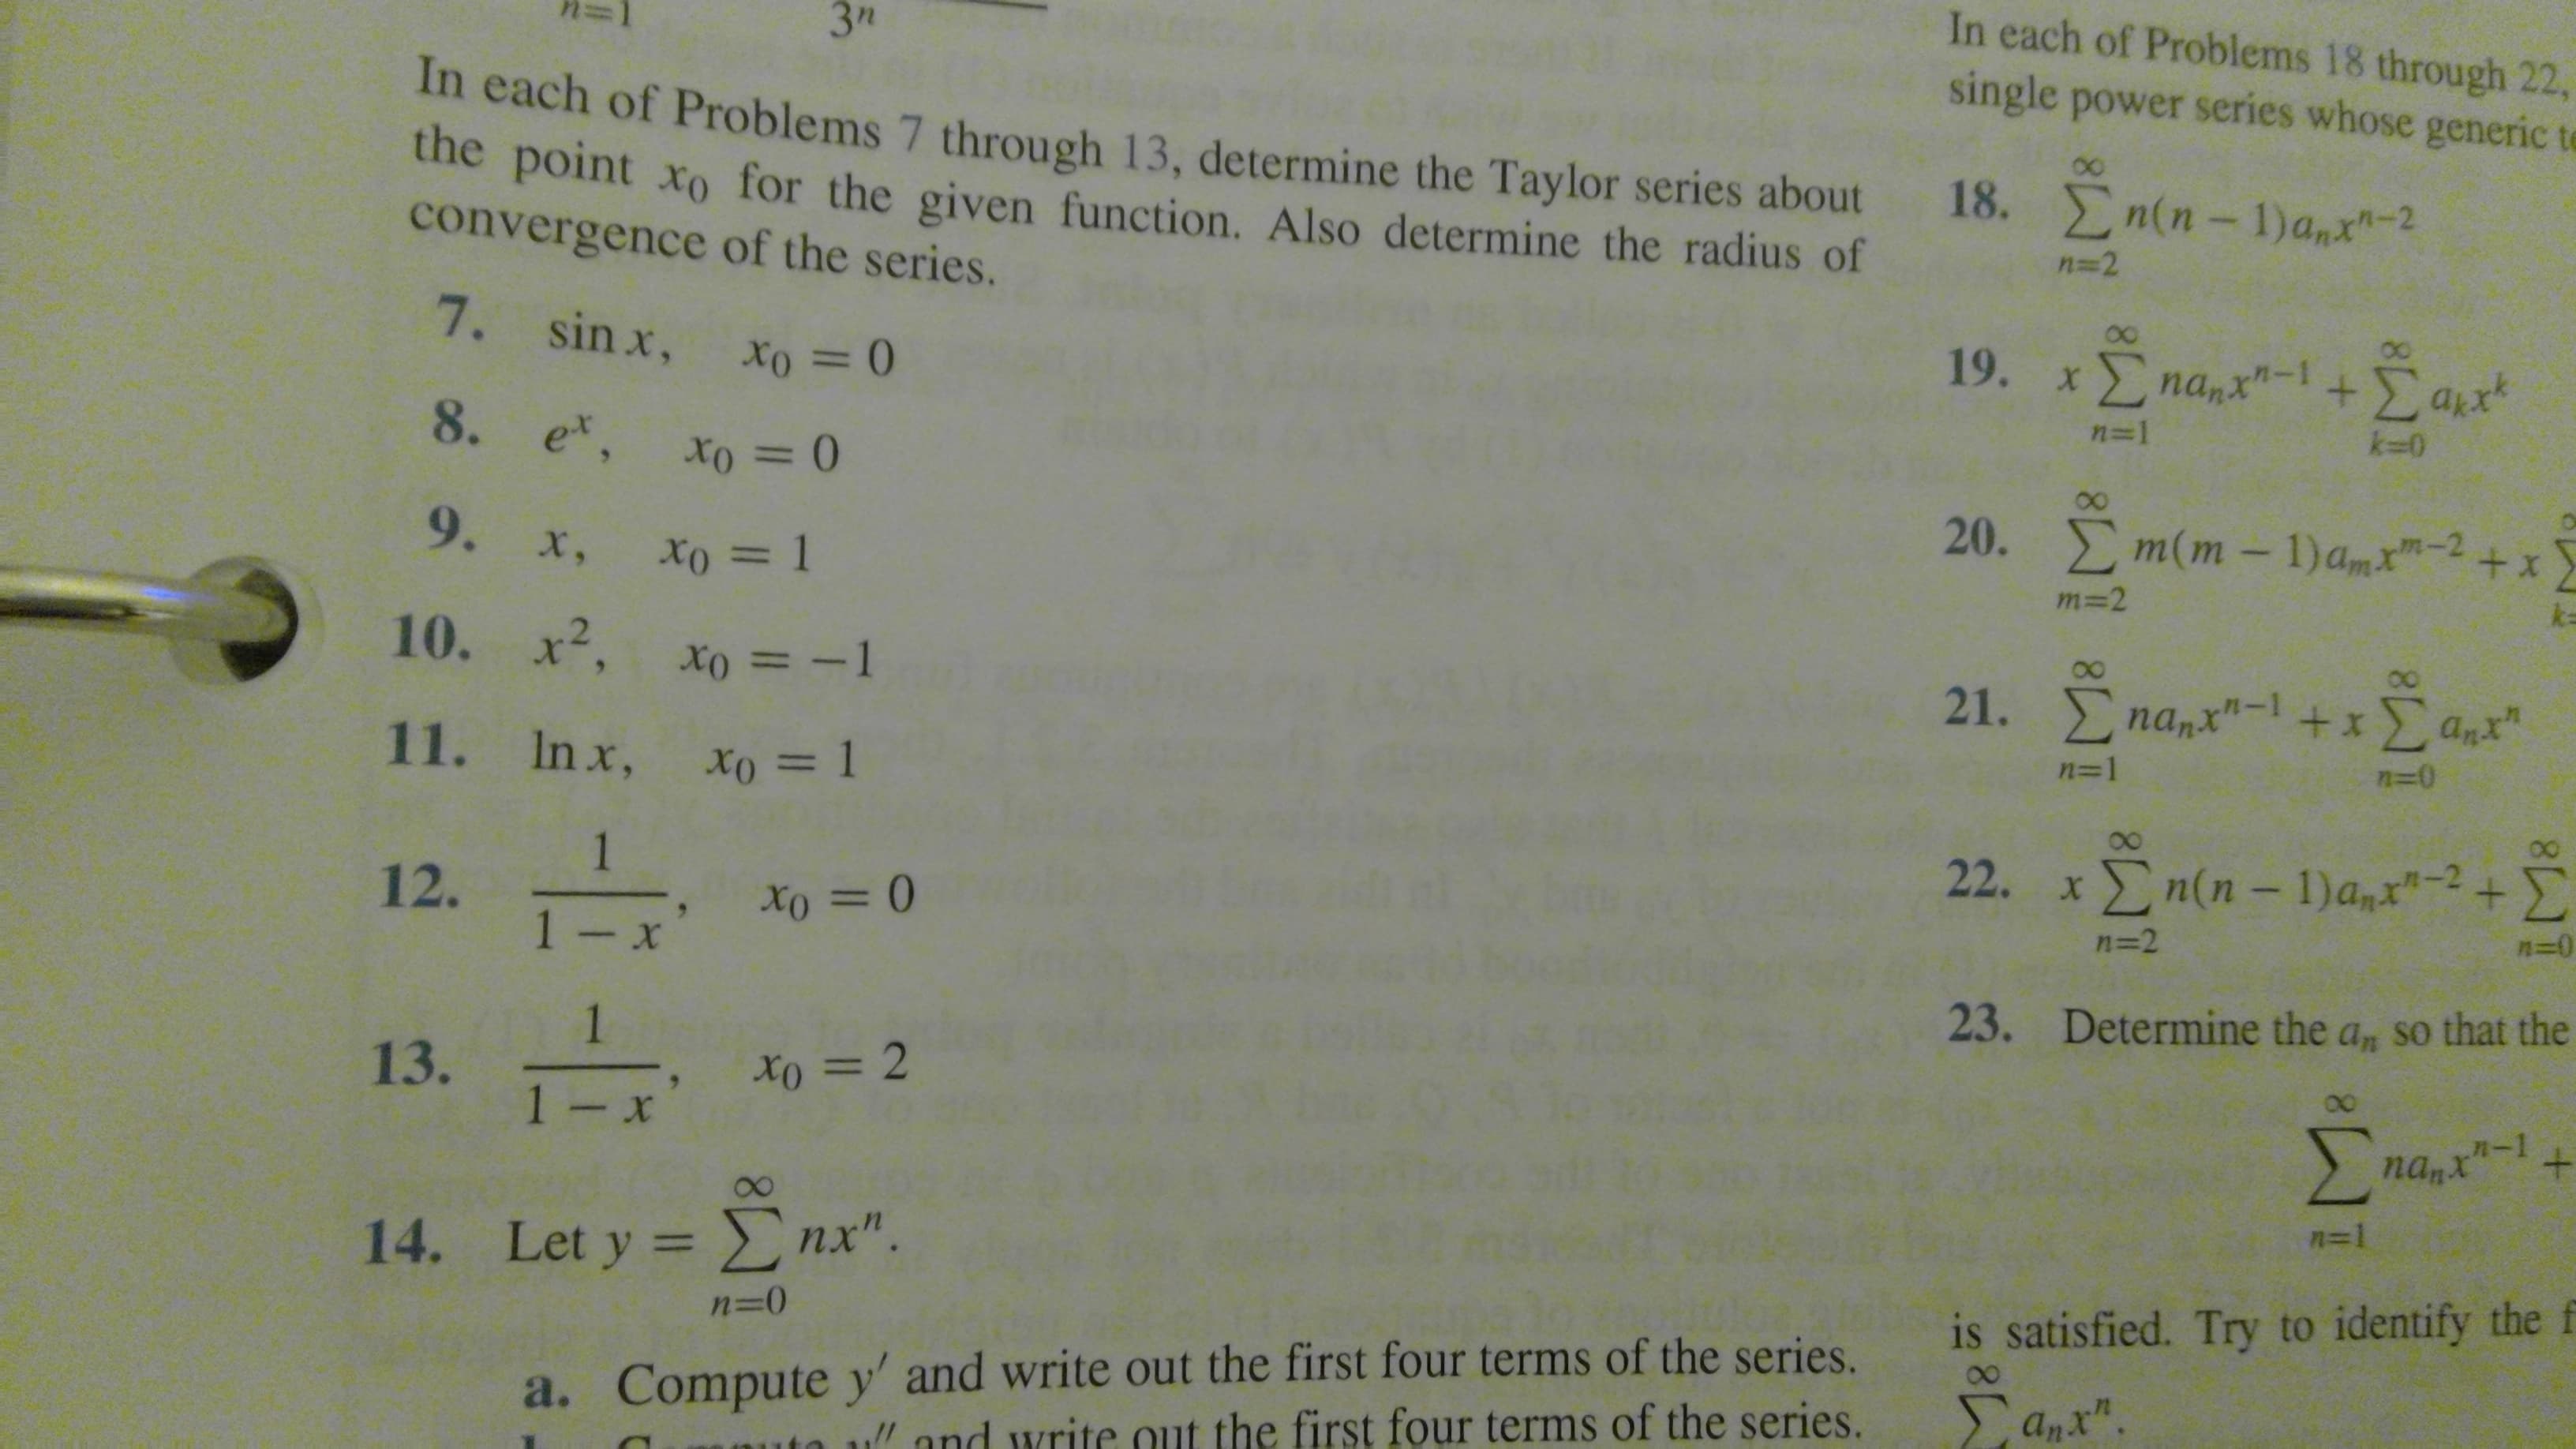 In each of Problems 18 through 22,
3"
single power series whose generic t
In each of Proble ms 7 through 13, determine the Taylor series about
the point xo for the given function. Also determine the radius of
convergence of the series.
00
18. n(n-1) a,x-2
n -2
7. sin x,
19. xΣna,x"-1 Σ αx
+Σαπ'
n=1
k-0
8. ex, xo = 0
m(m - 1)am"-2
20.
+ x
9. x, xo = l
m=2
k=
10. x2, xo = -1
21. nanx"-1 +xanx
n=0
11. Inx, xo = 1
n=1
22. xn(n-1)a,x"-2+
1
12.
1- x
n=0
=2
23.
Determine the a, so that the
1
13.
1 - x
+
nan"-1
n=1
14. Let y nx".
is satisfied. Try to identify the f
n=0
a. Compute y' and write out the first four terms of the series.
uand write out the first four terms of the series.
Σaχ.
E-E
